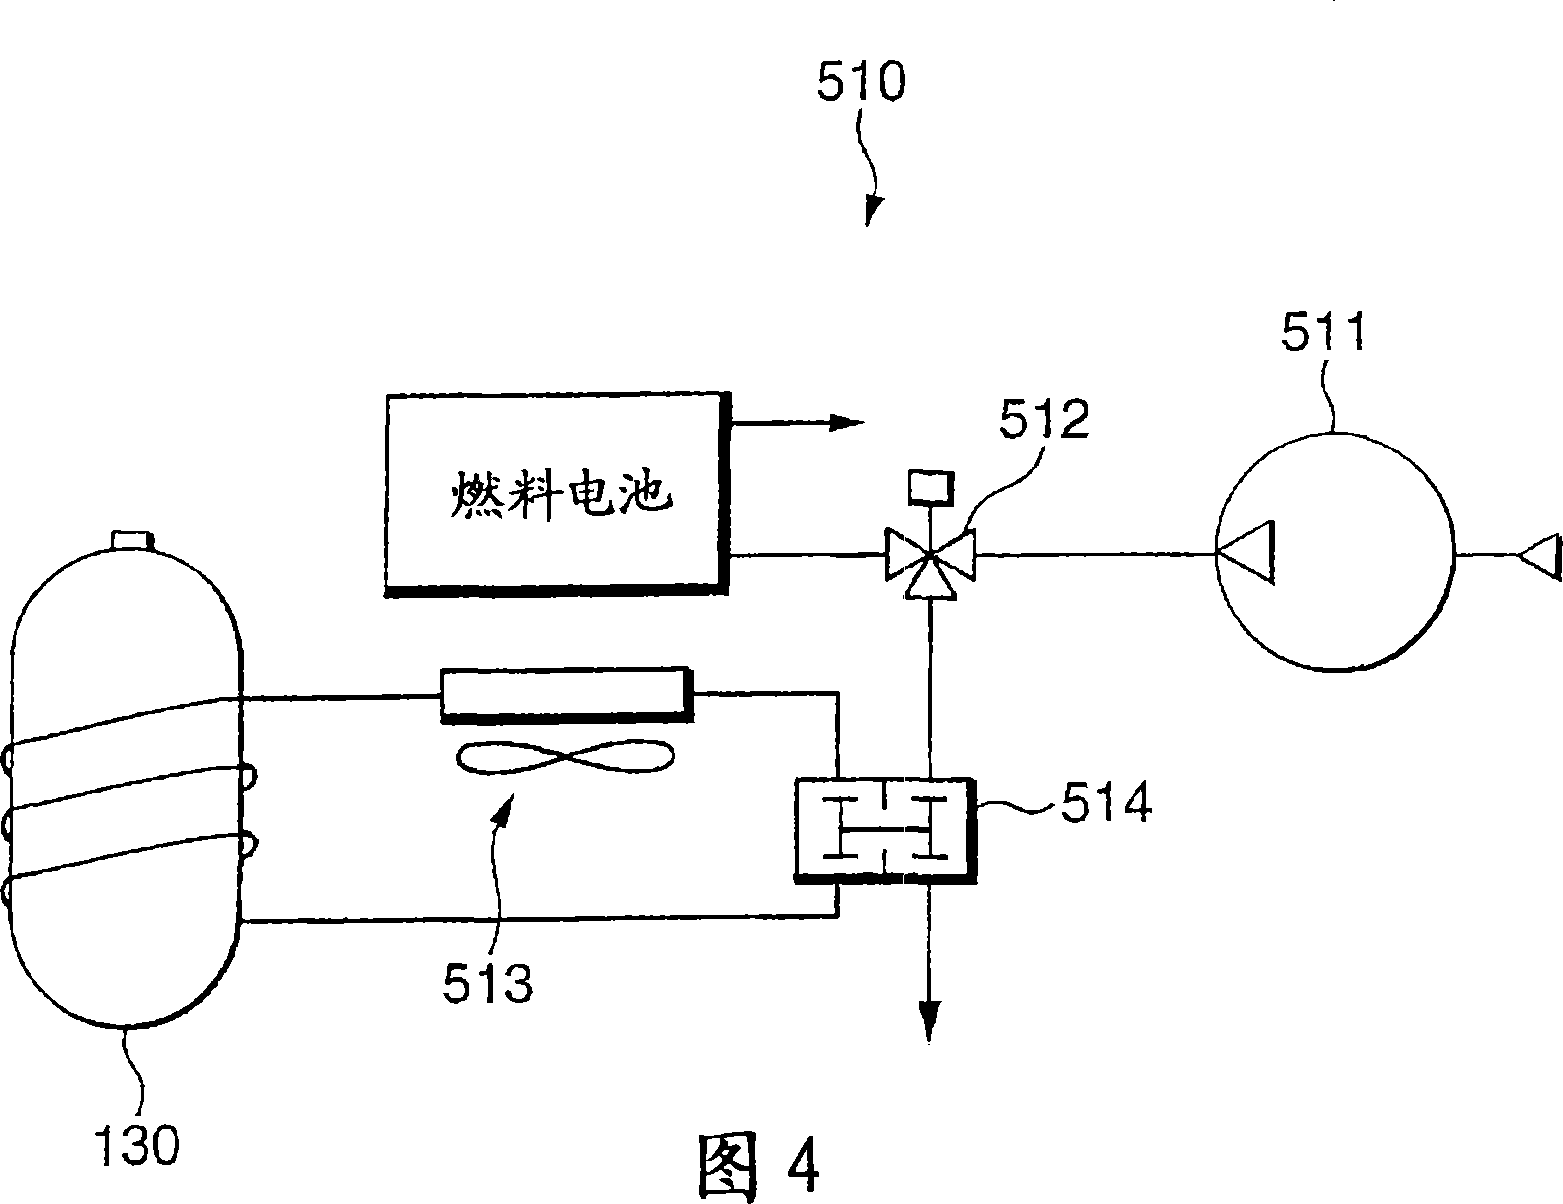 Fuel resupply facility, fuel resupply device, and method for resupplying fuel